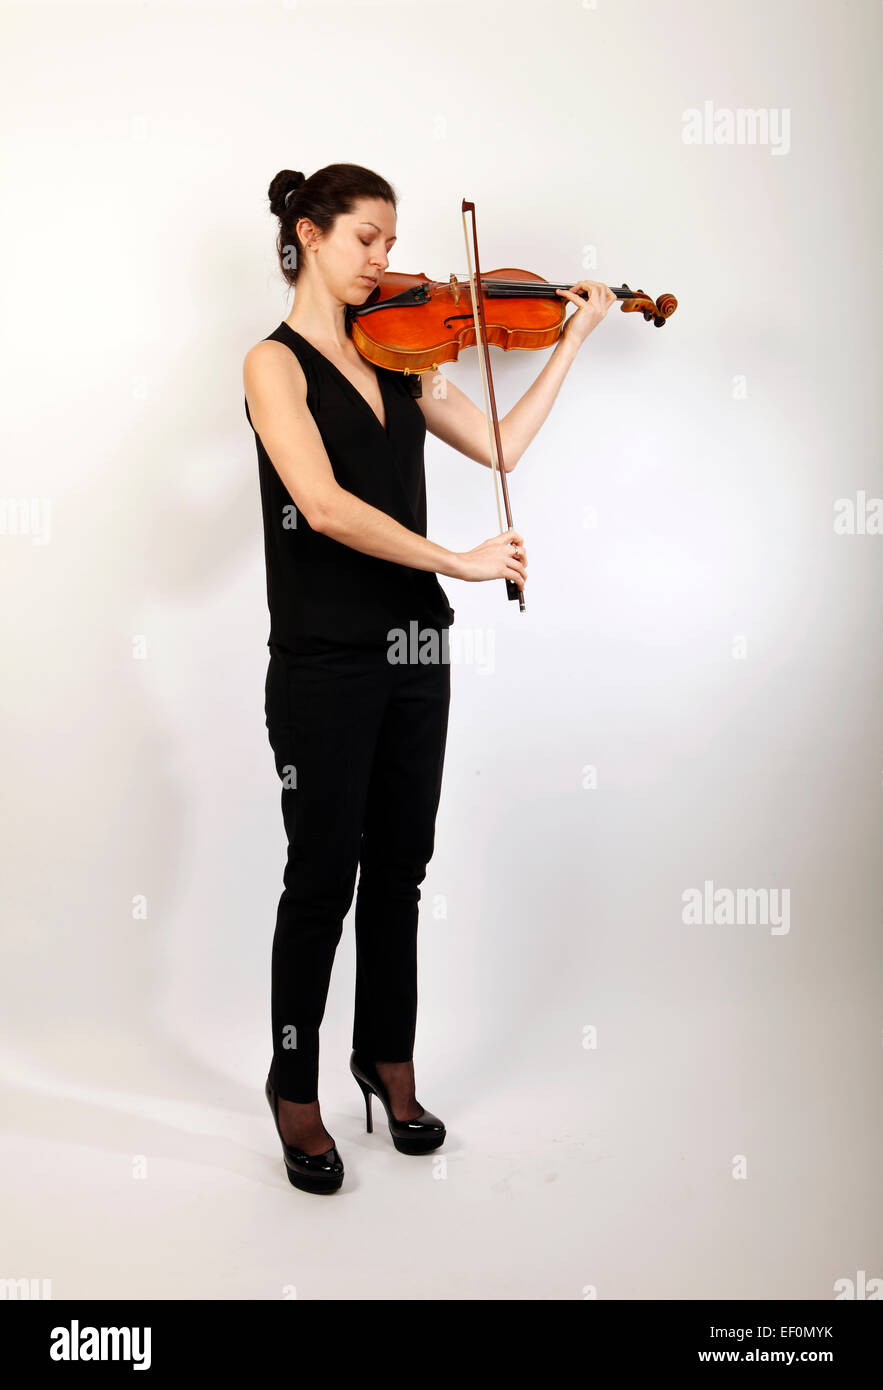 Viola player, playing her musical instrument Stock Photo